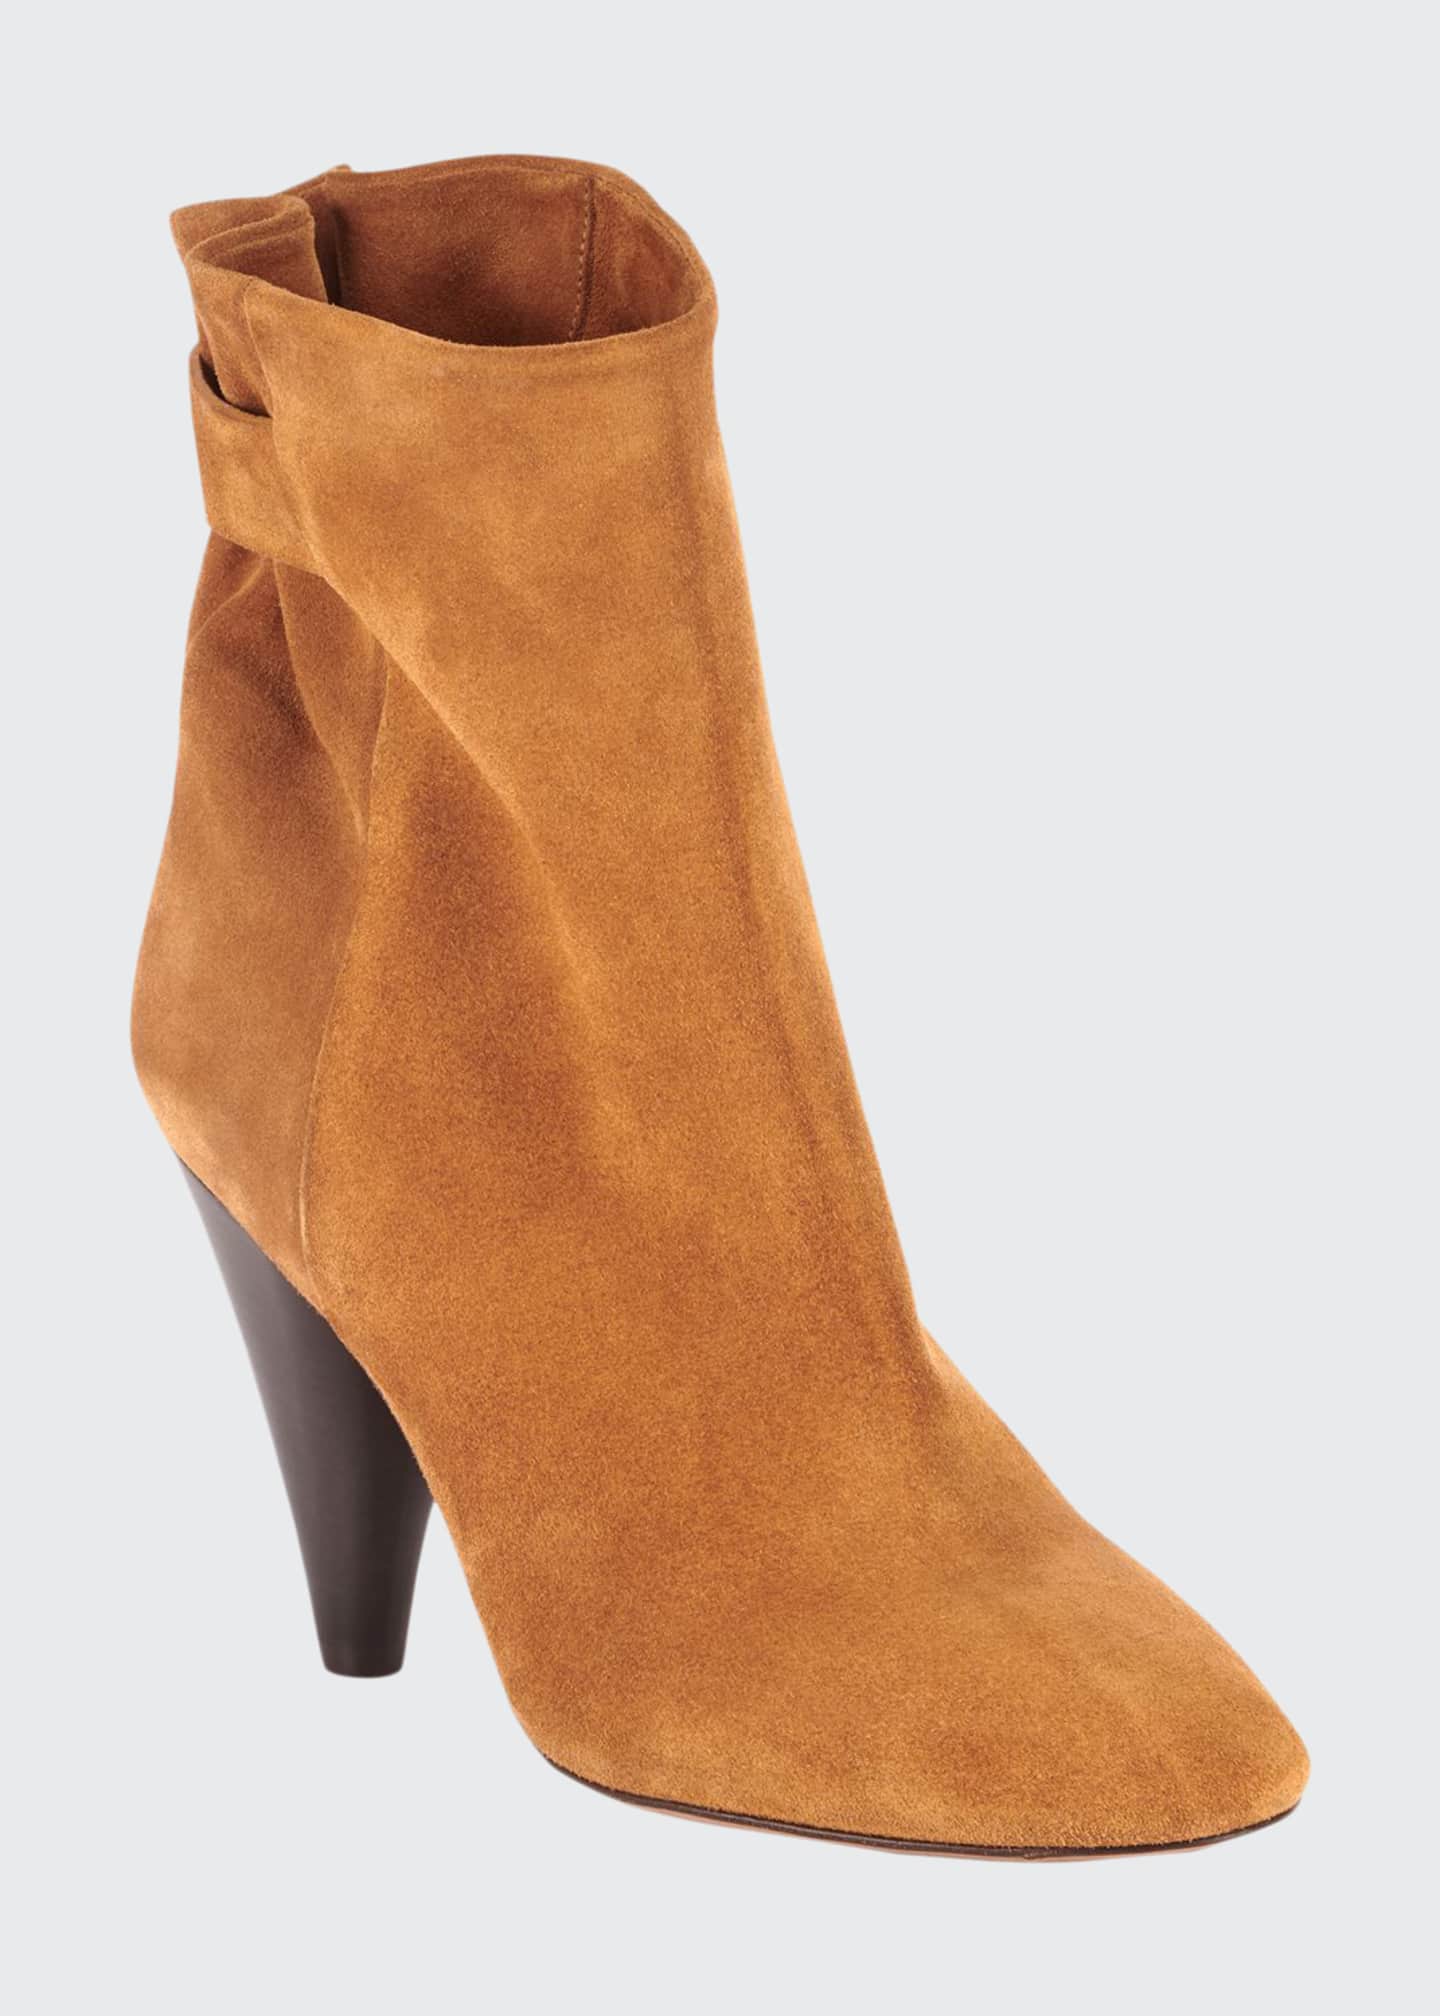 soft suede boots